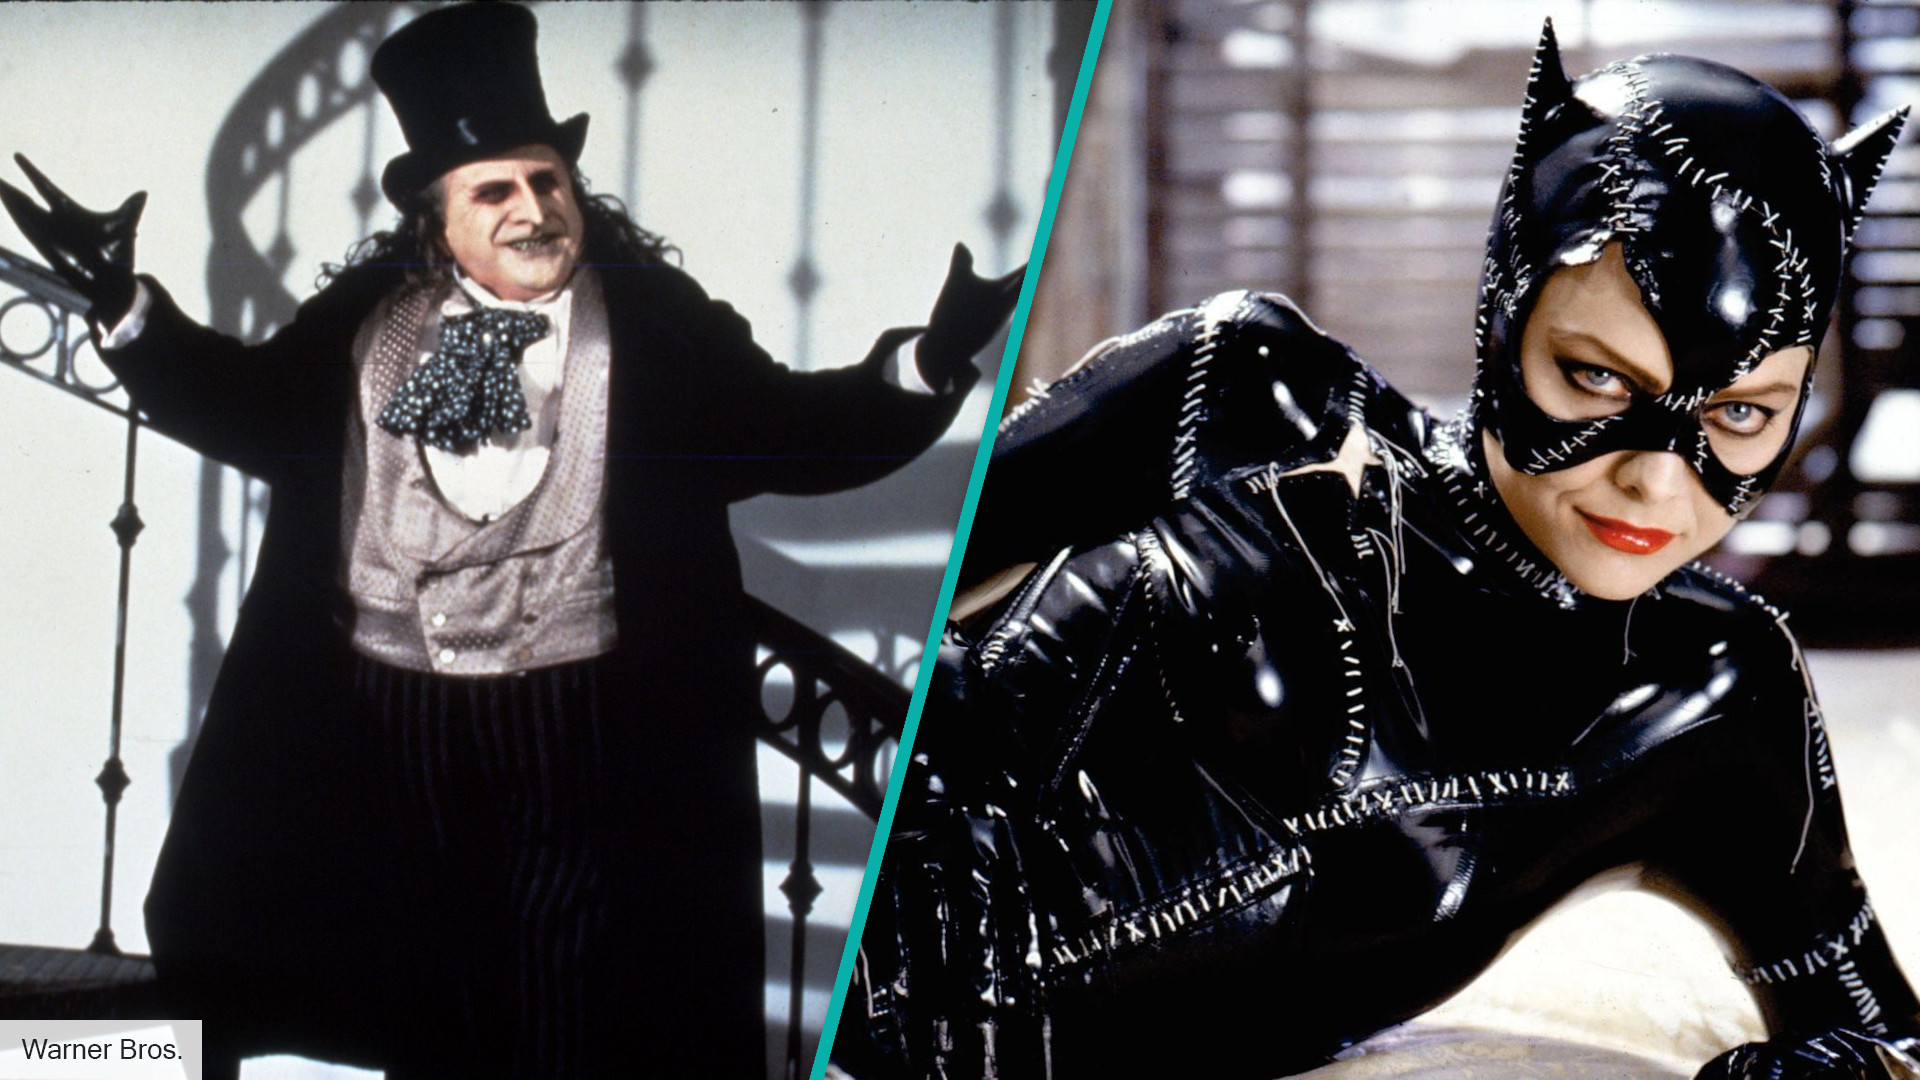 Batman Returns writer says movie “wasn't respected” when it came out | The  Digital Fix